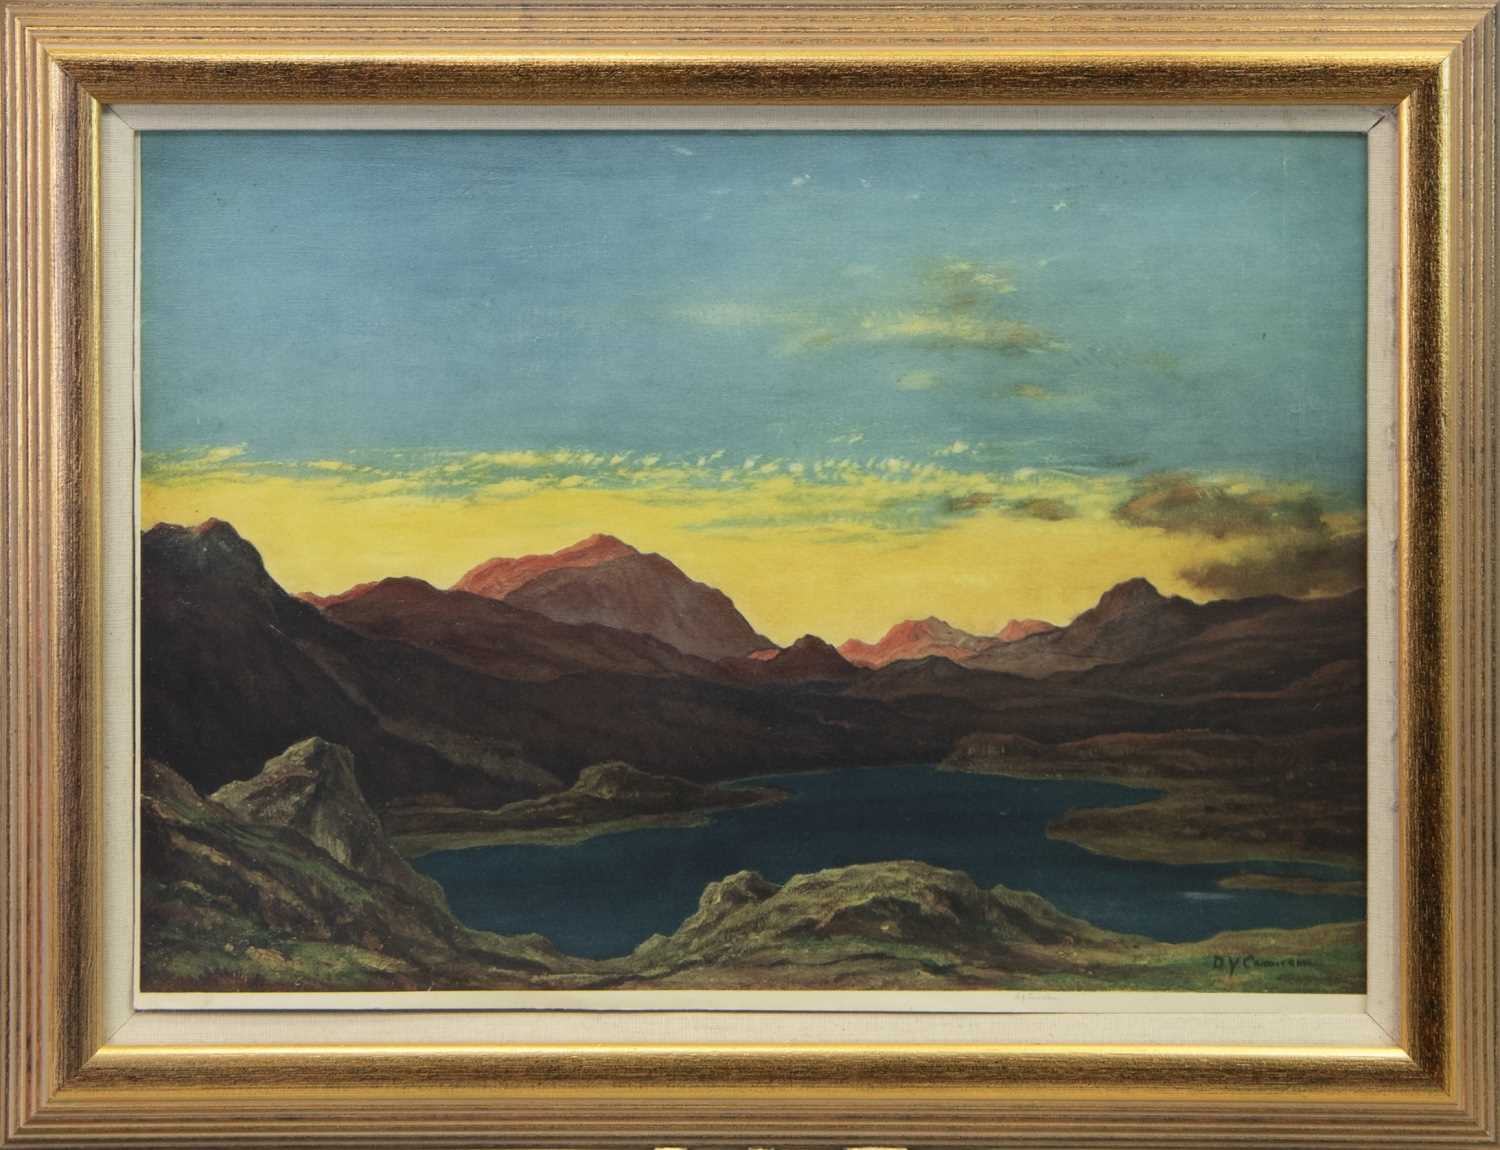 Lot 26 - SUNSET AT THE LOCH, A LITHOGRAPH BY D Y CAMERON